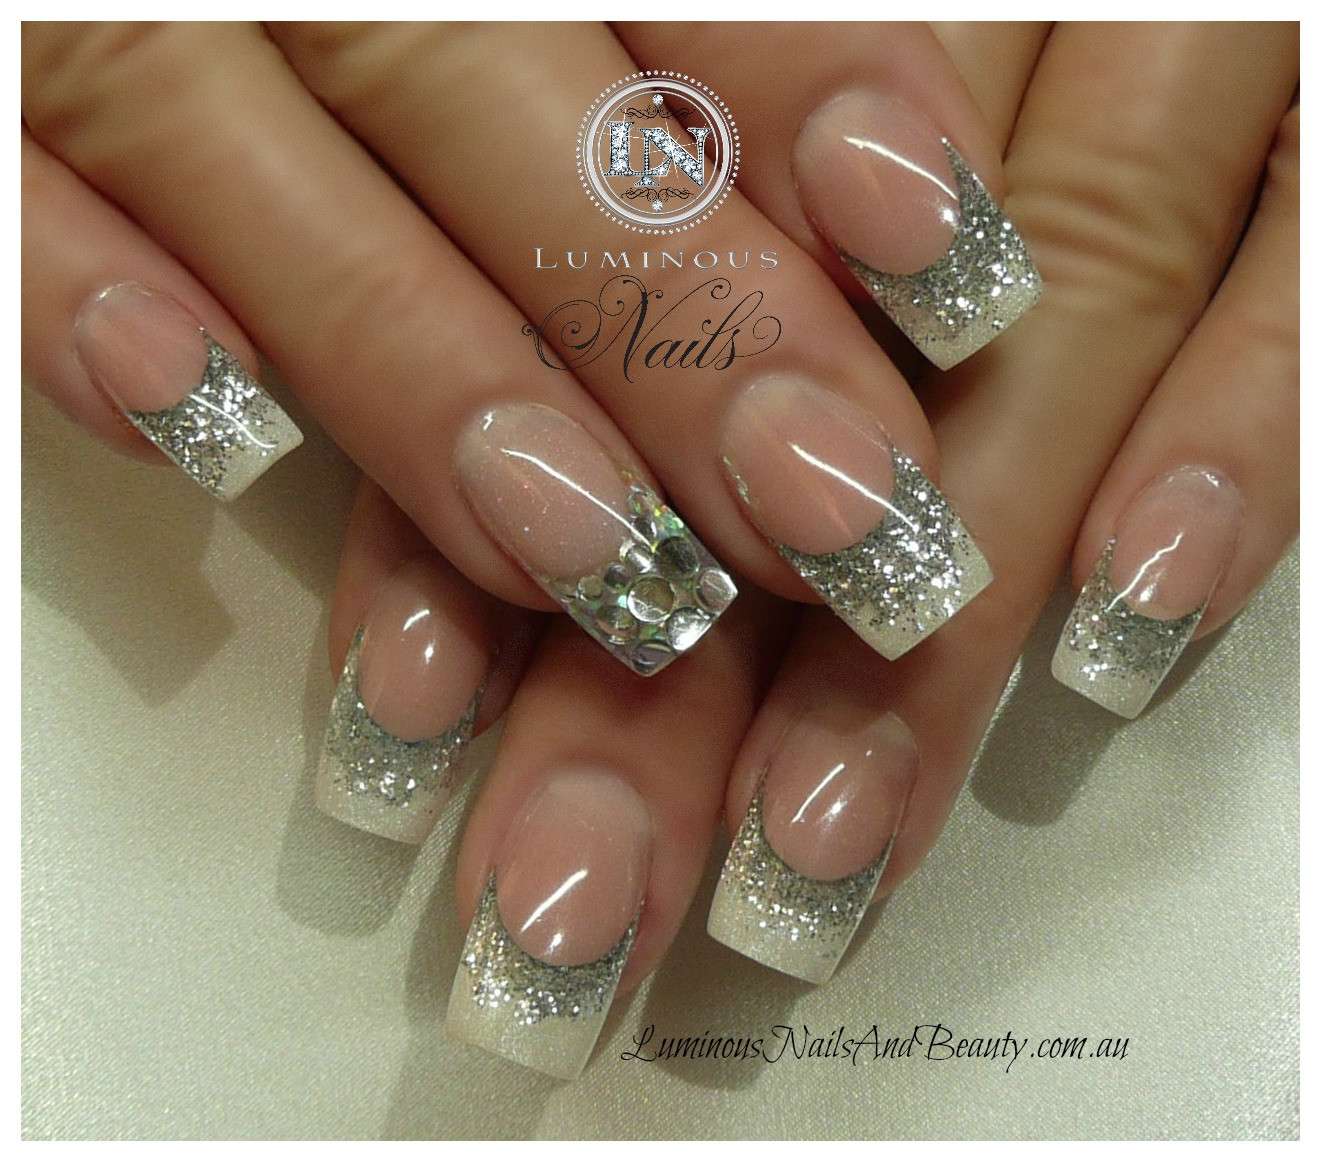 Nails With Silver Glitter
 Luminous Nails September 2012